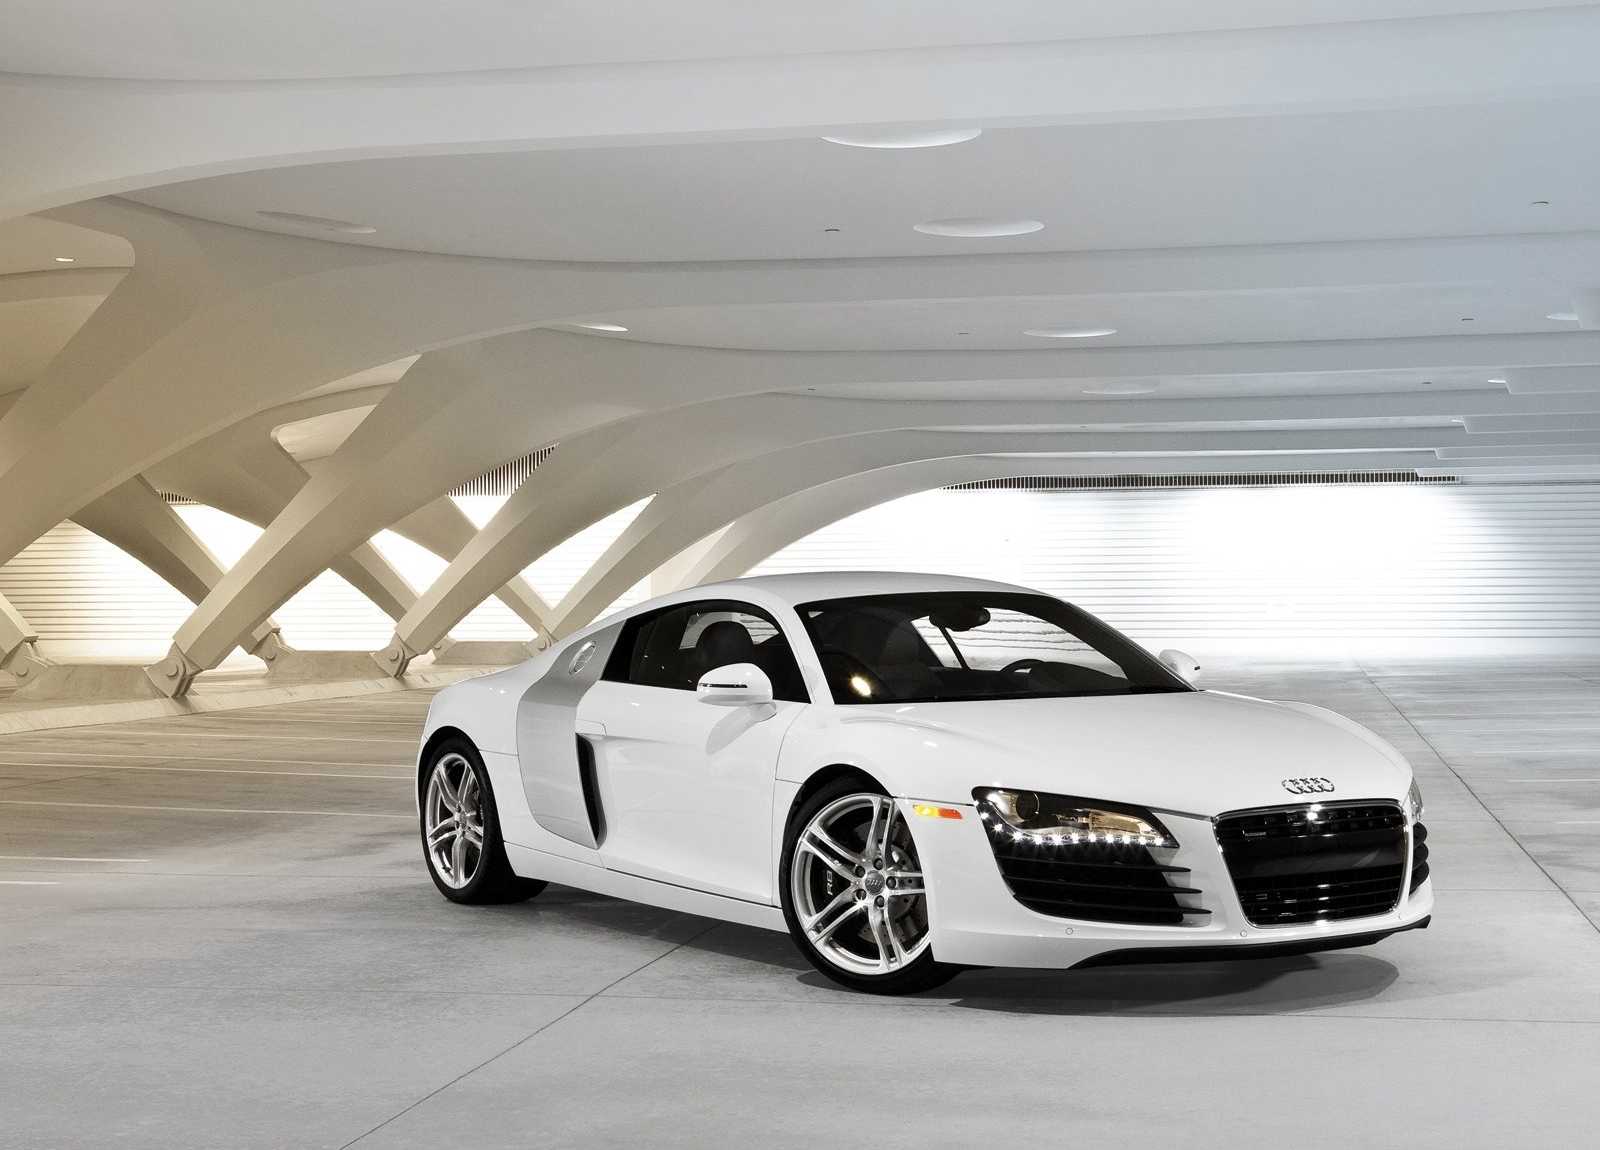 Audi R8 HD Wallpapers The World of Audi